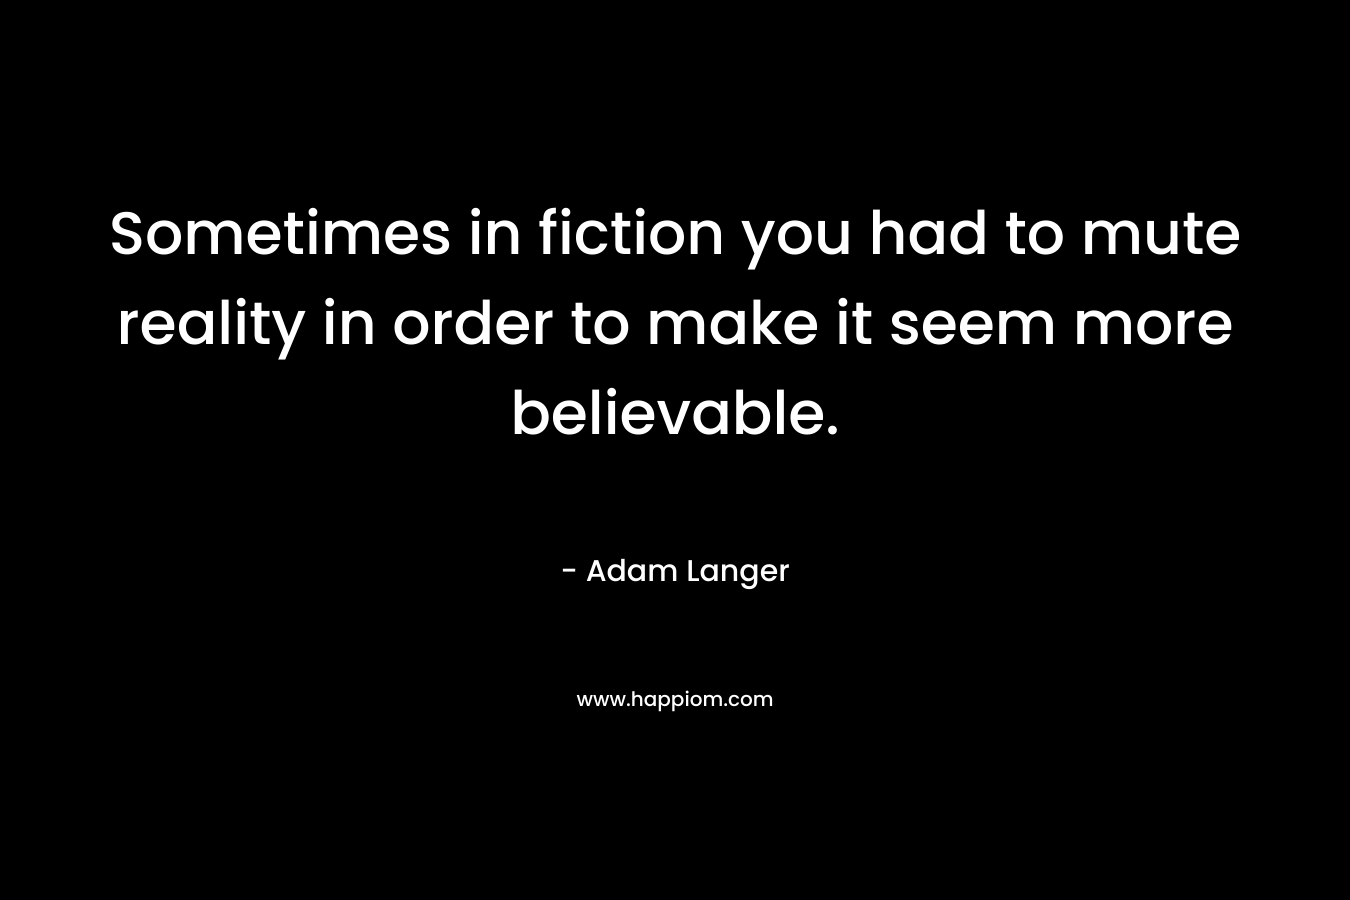 Sometimes in fiction you had to mute reality in order to make it seem more believable. – Adam Langer